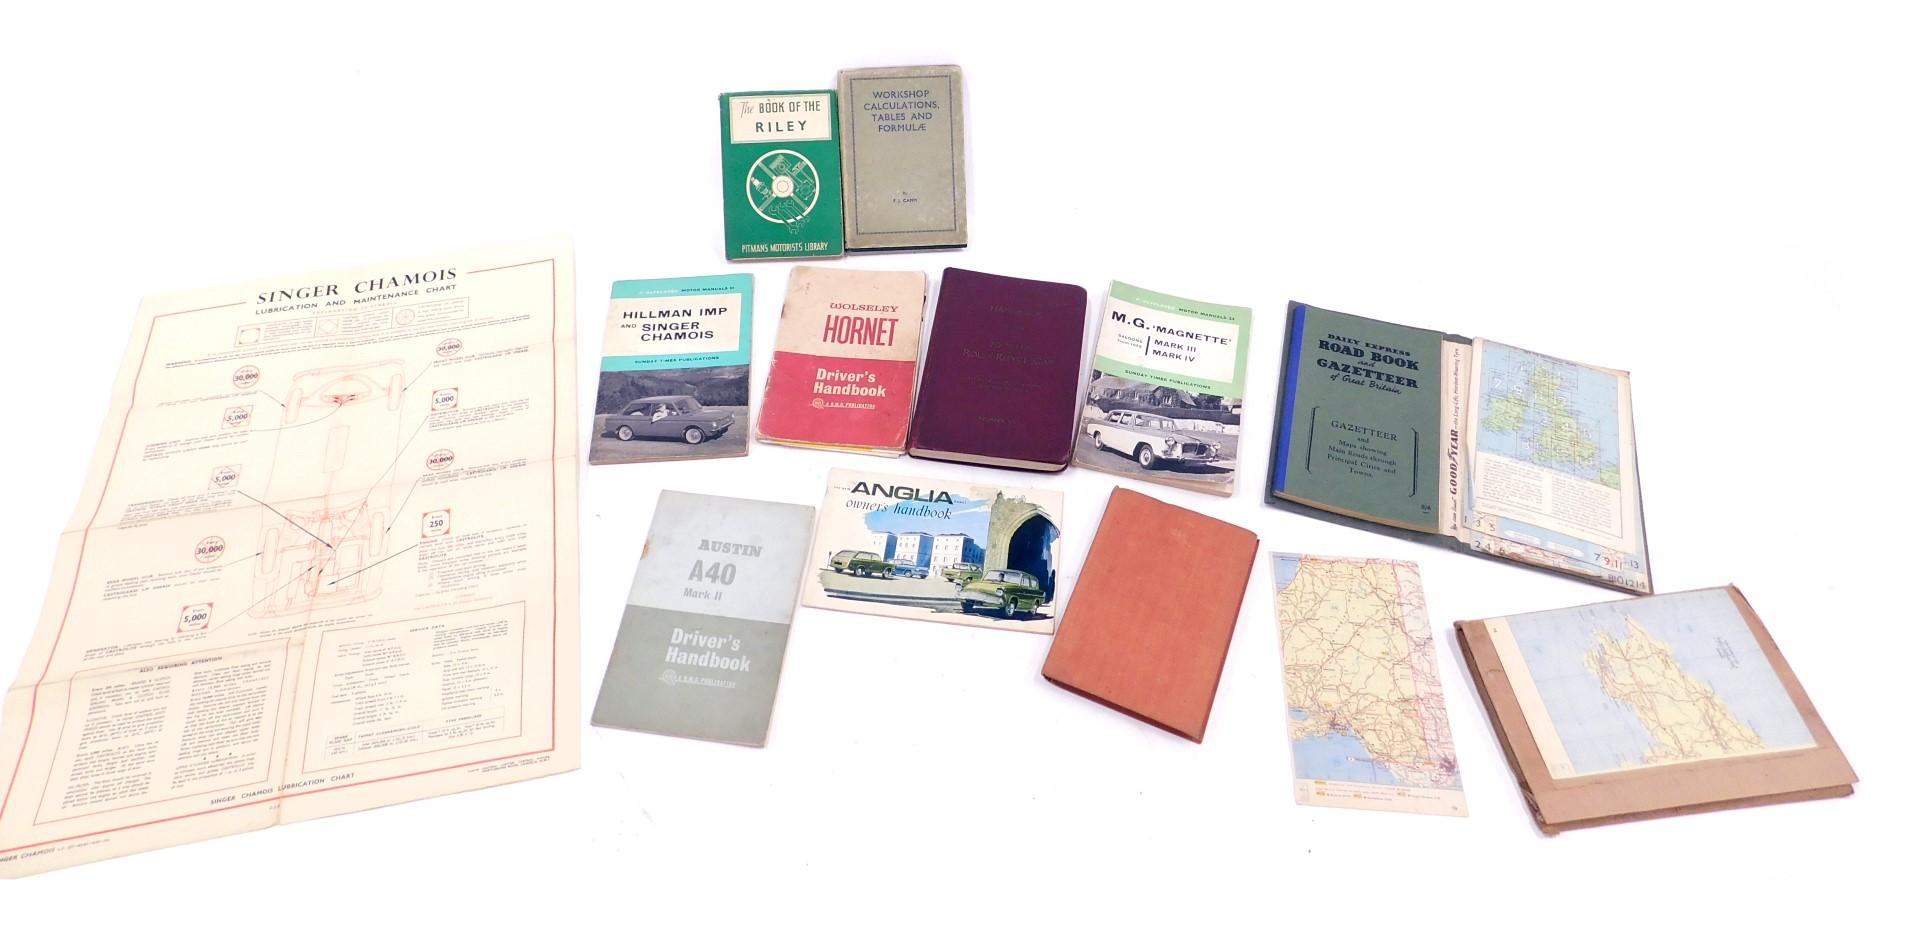 Miscellaneous ephemera, to include Daily Express Road Book, with maps, MG Magnet manual, manual for